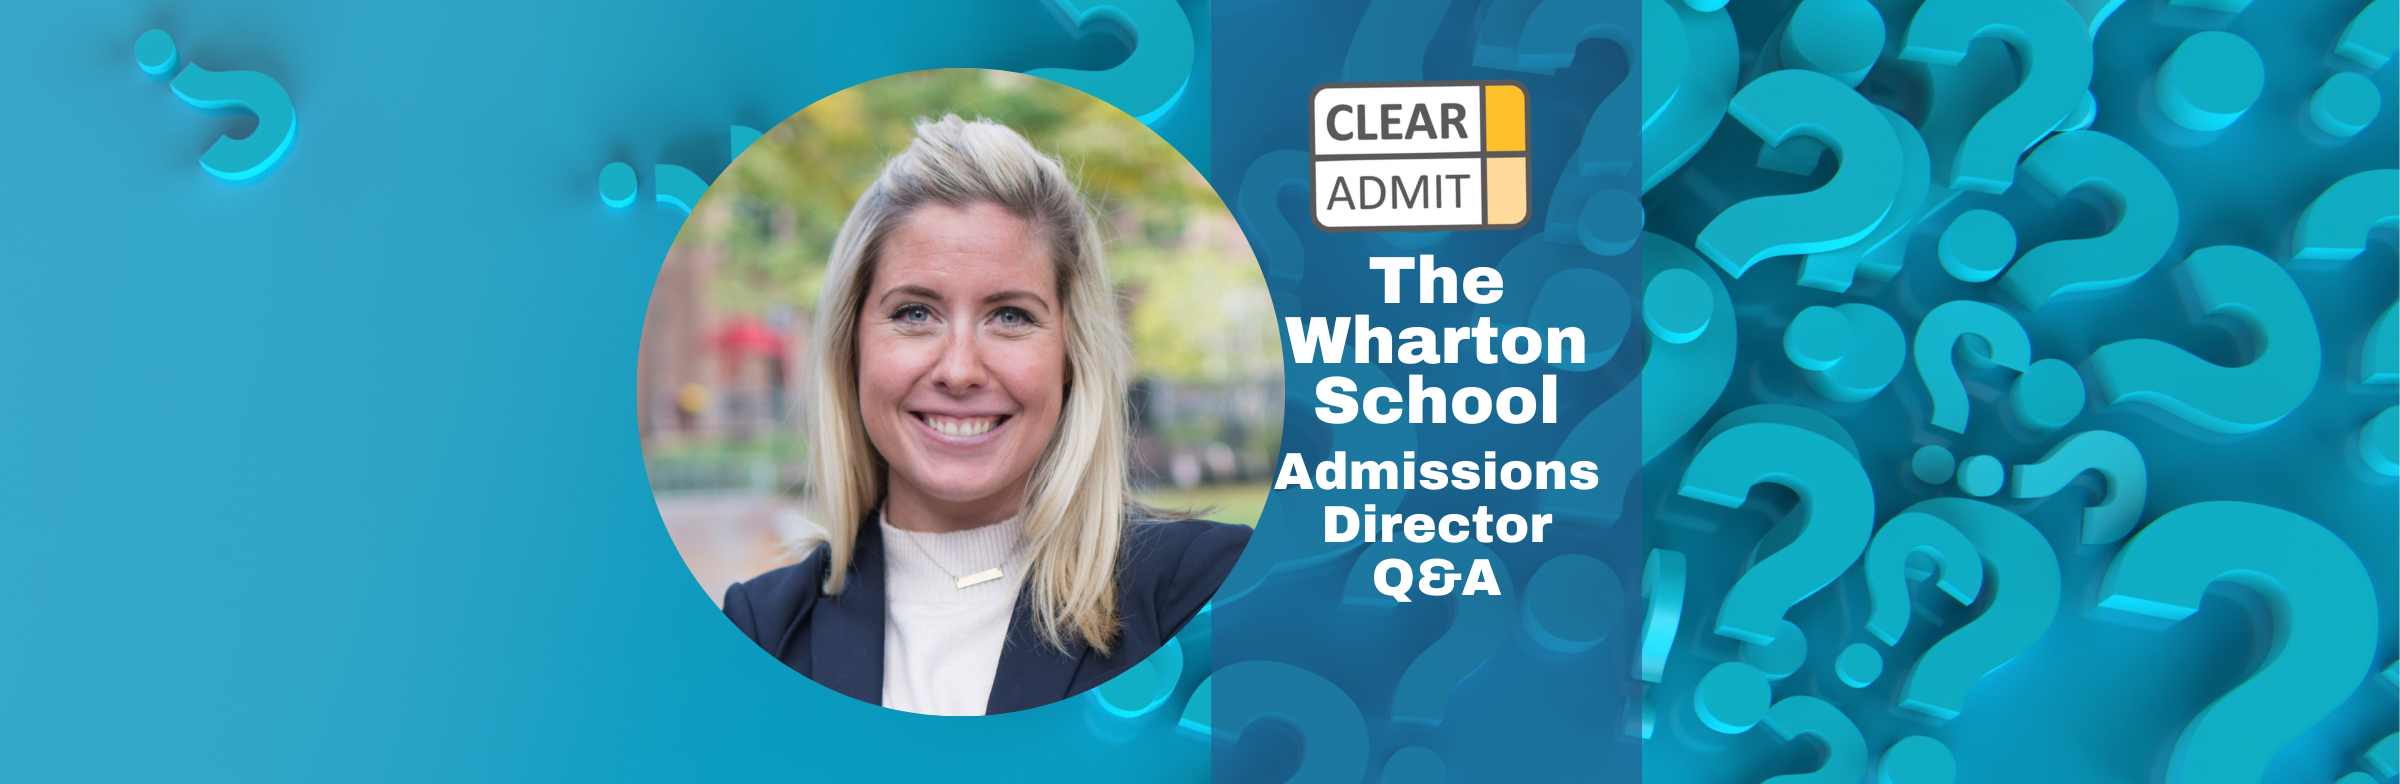 Image for Admissions Director Q&A: Blair Mannix of The Wharton School